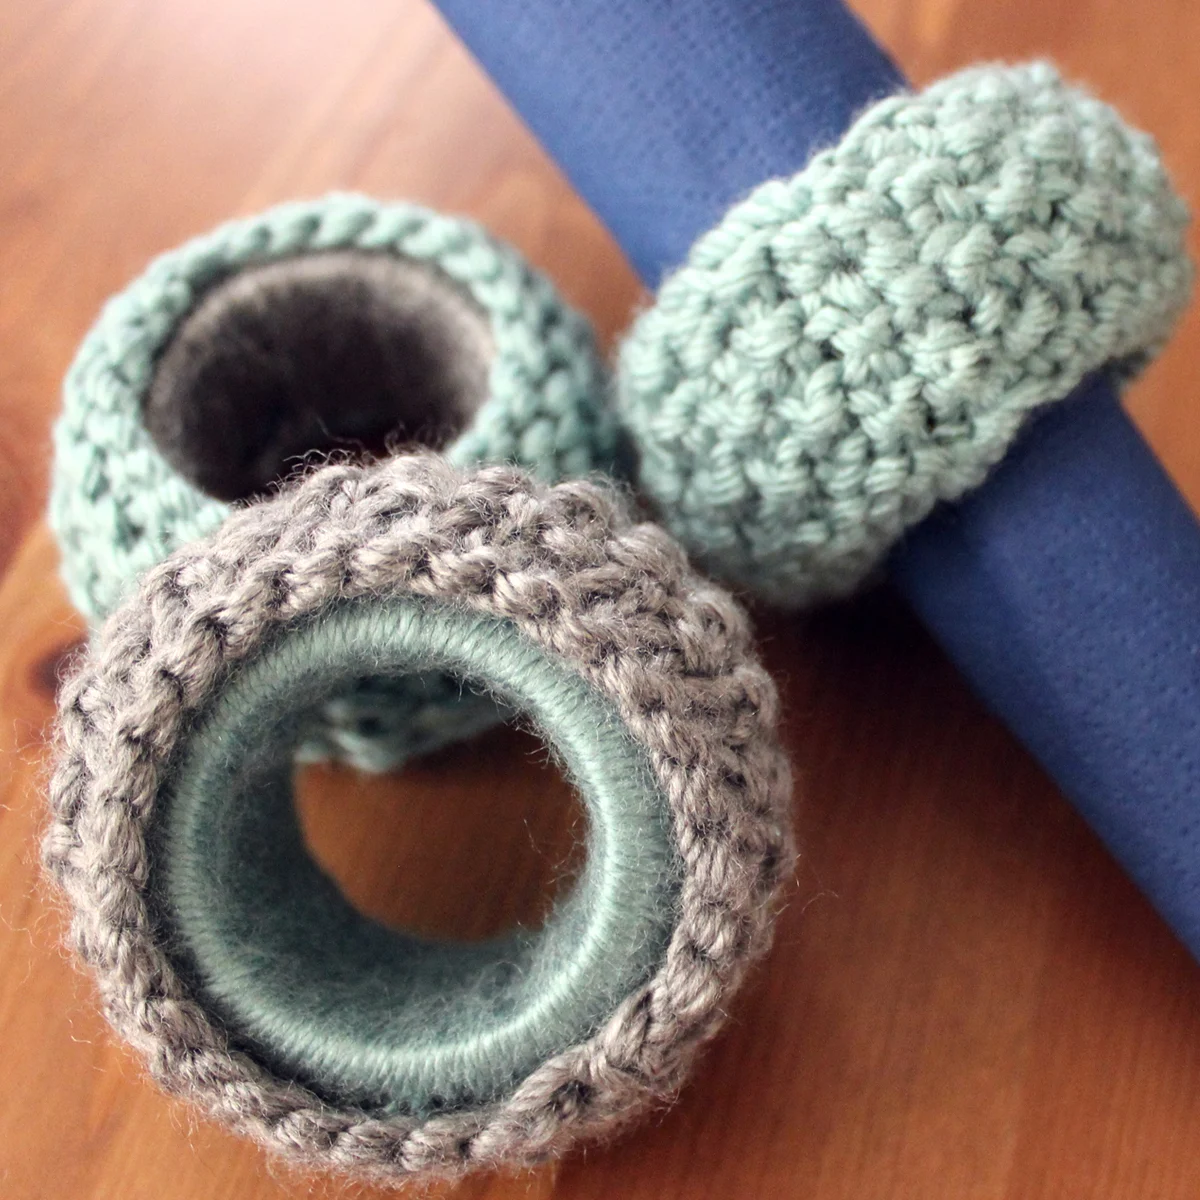 Knitted napkin rings in blue and grey yarn colors.